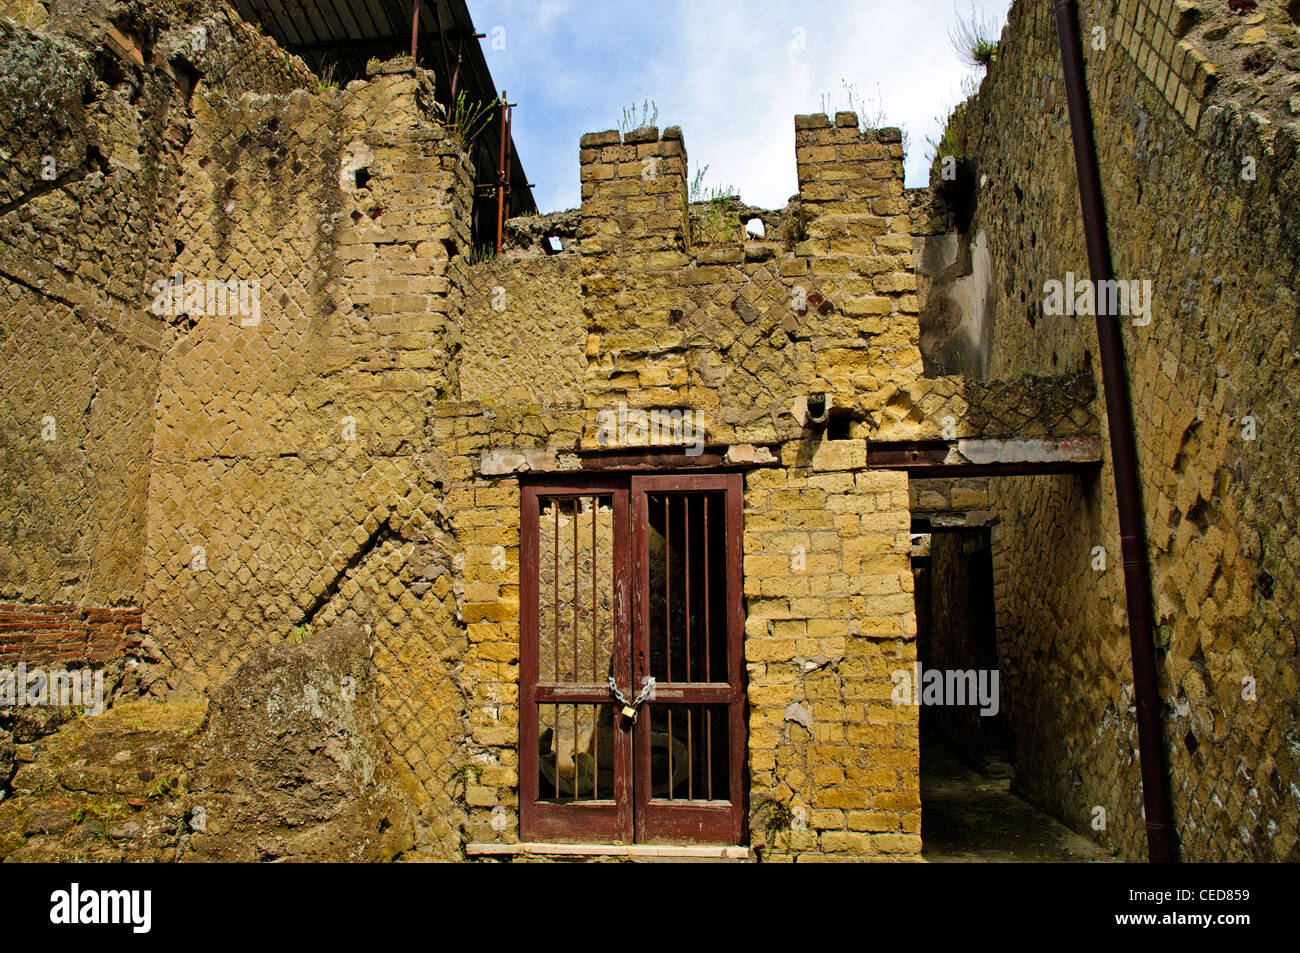 The excavated ruins of a two storey building containing the remains of two grindstones behind the gate, Herculaneum Stock Photo